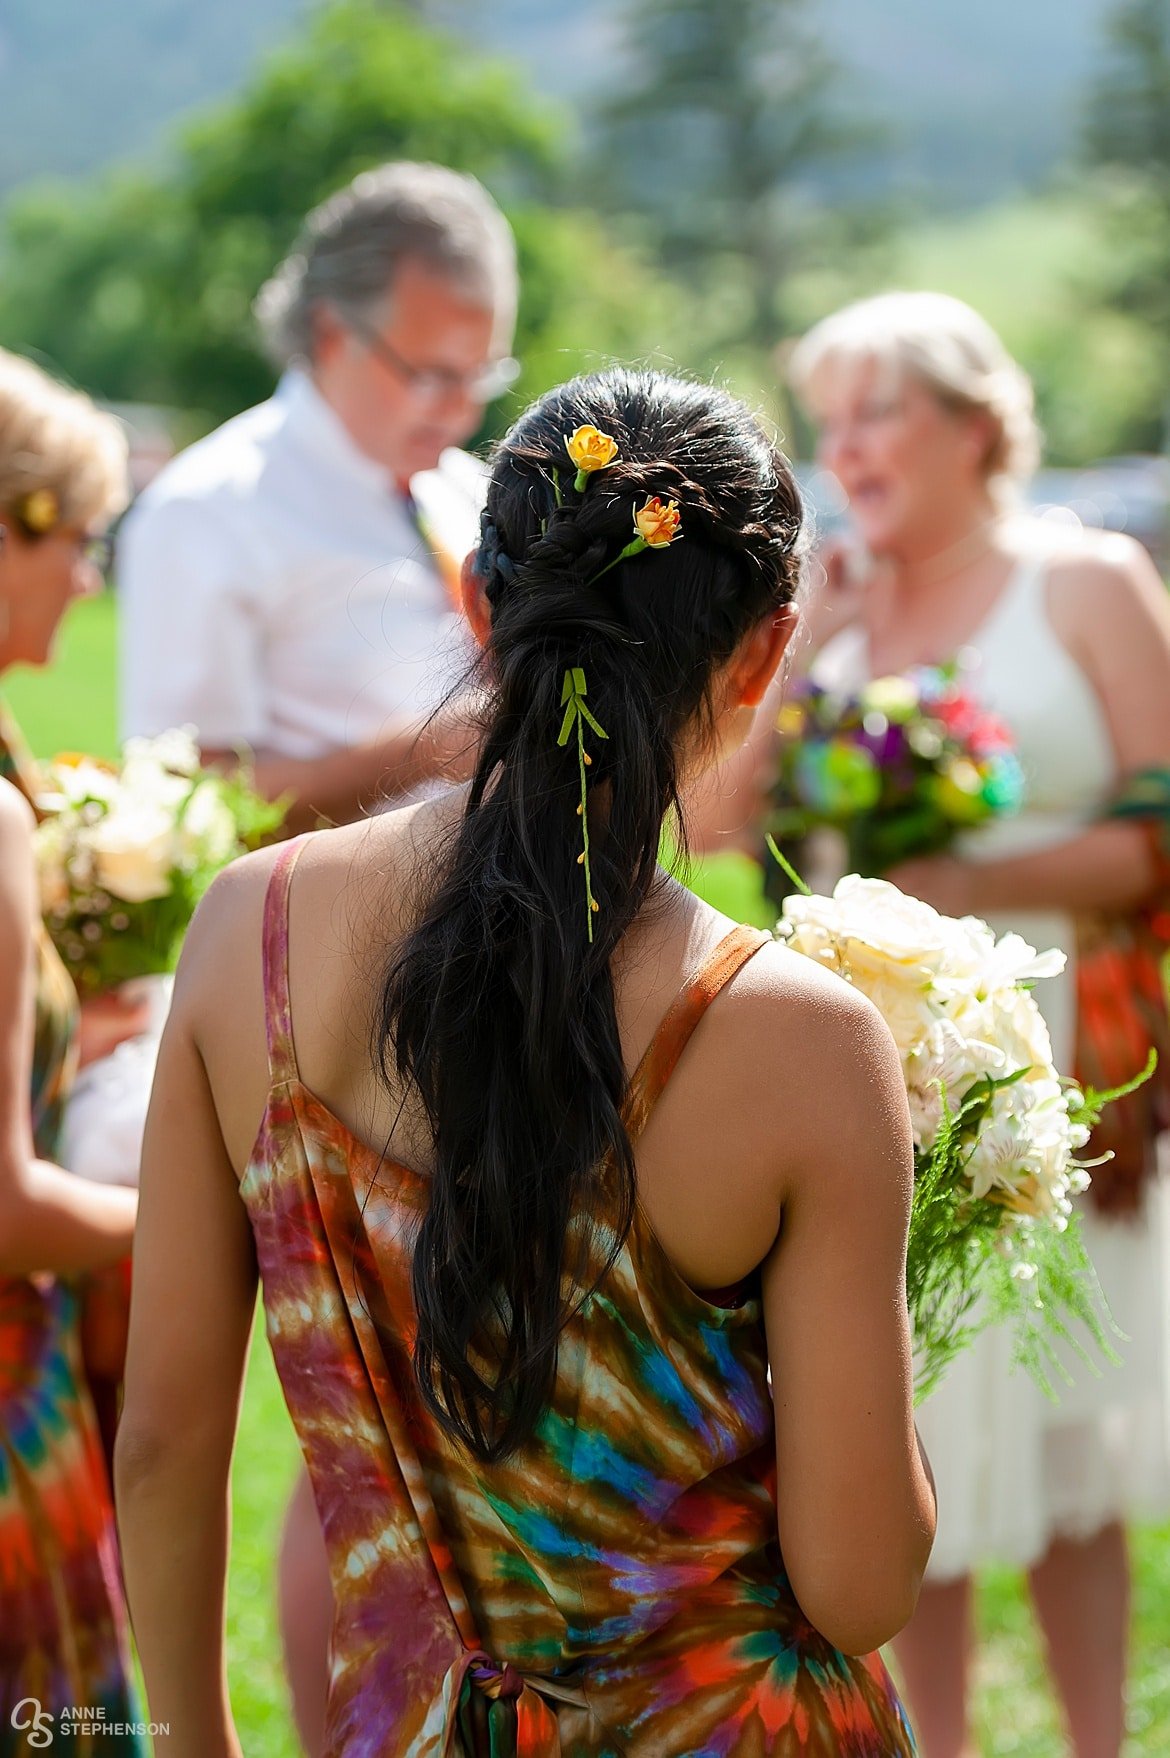 Back side view of the groom's daughter with pretty ribbons woven in her dark Asian hair and colorful tie-dye attire.